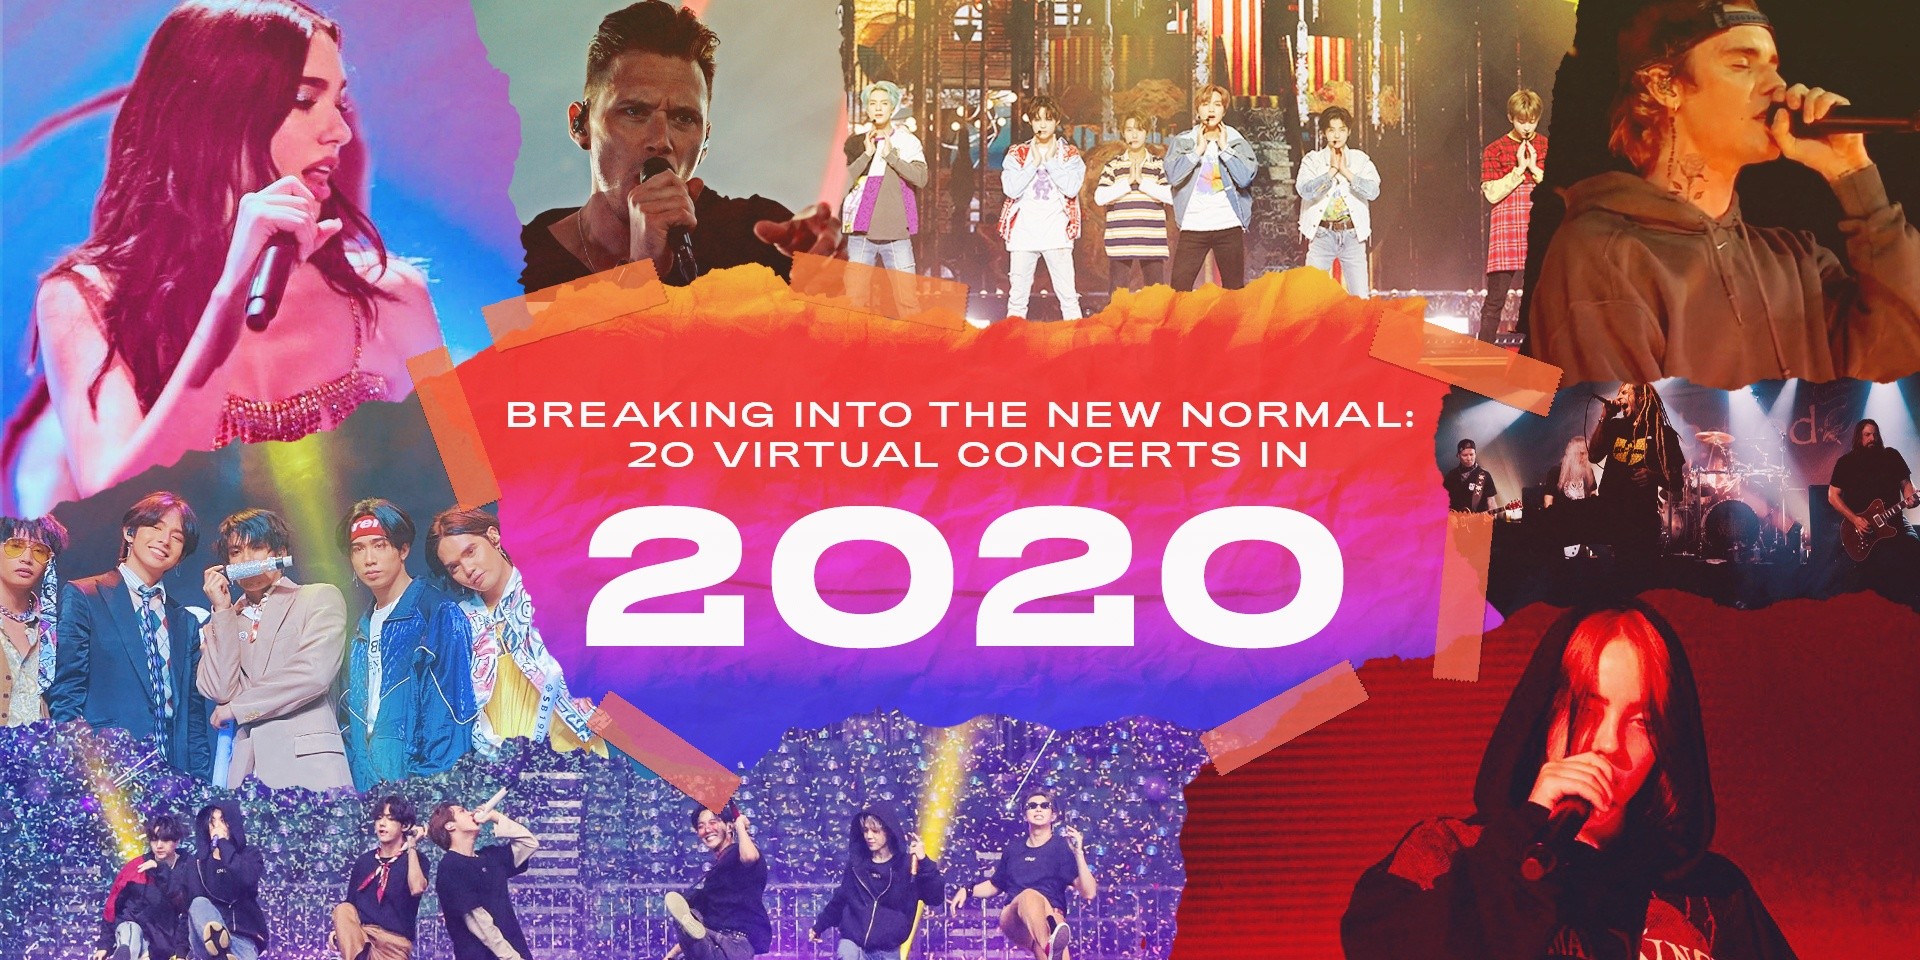 Breaking into the new normal: 20 virtual concerts in 2020